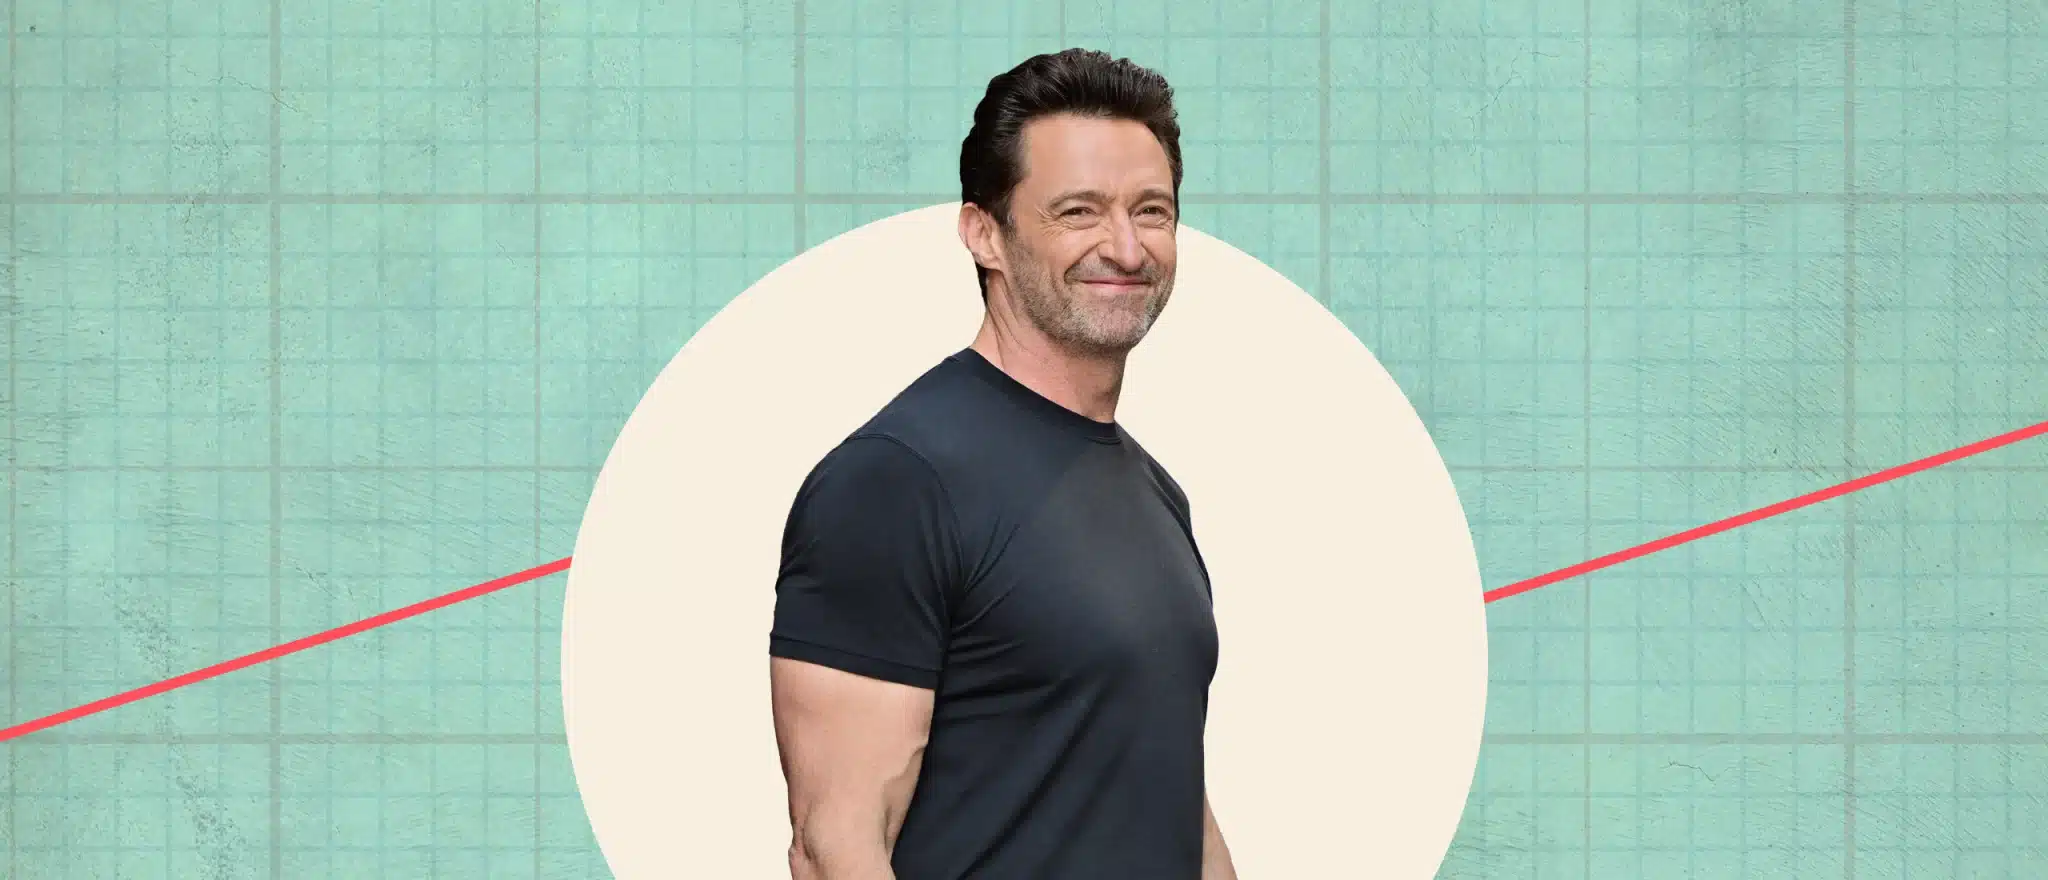 Guess How Many Calories Hugh Jackman Is Eating for Deadpool 3?